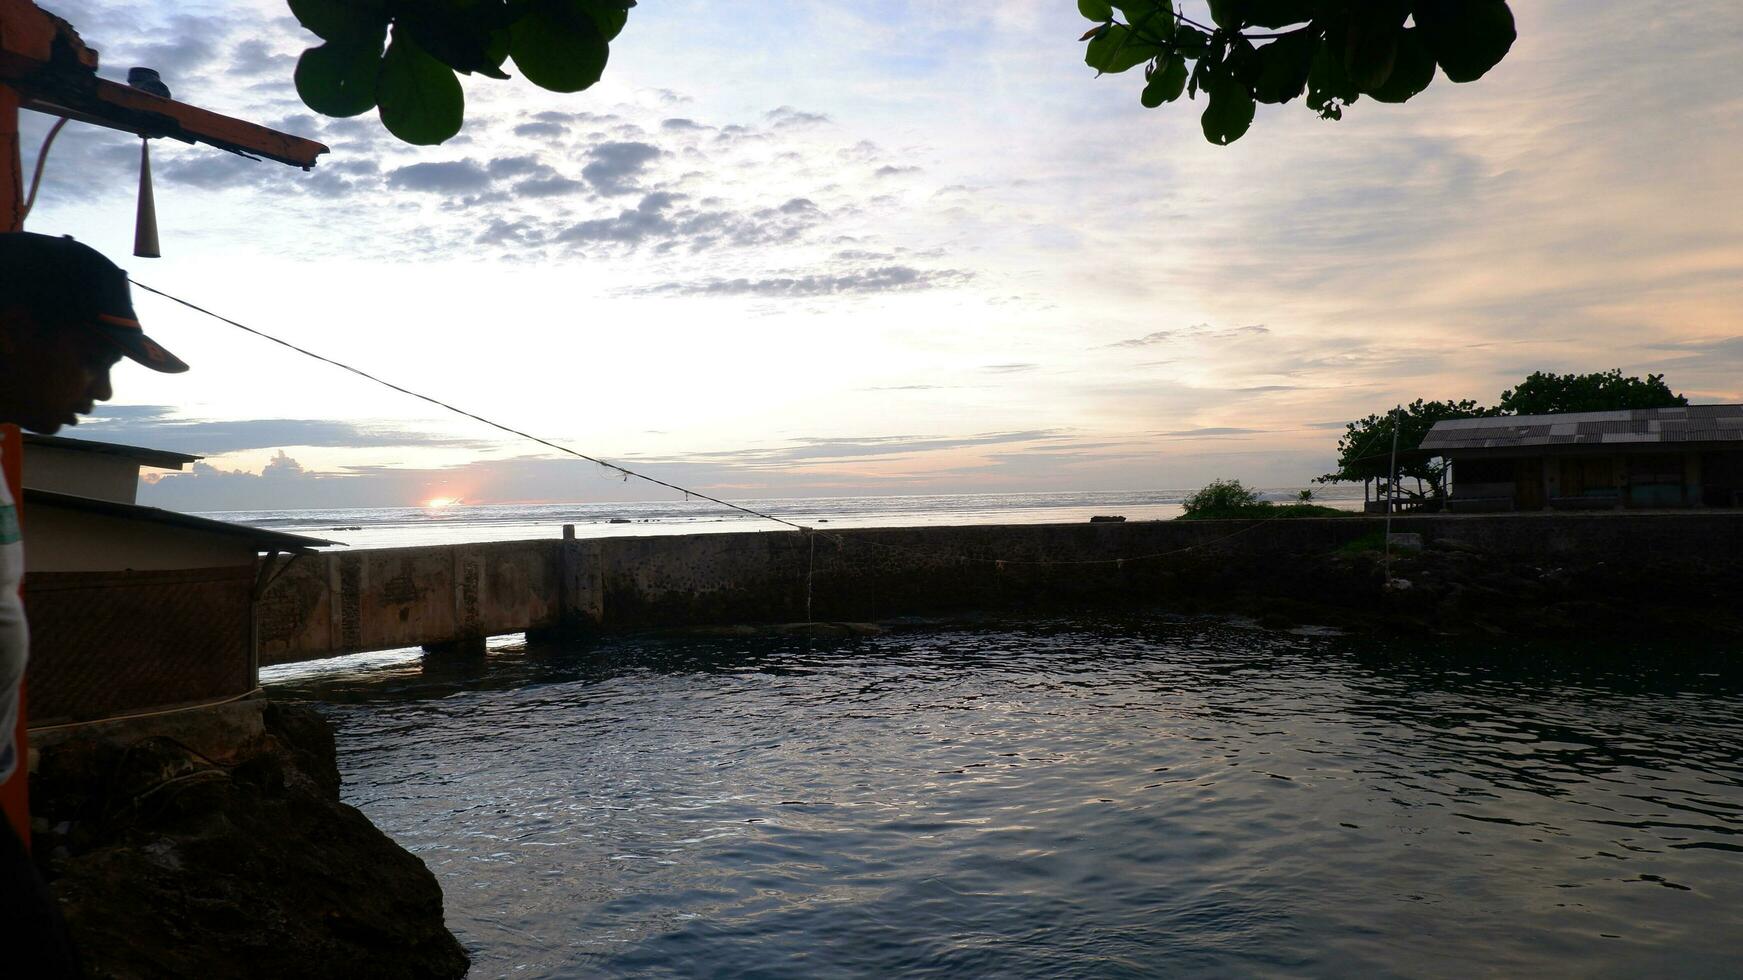 Afternoon sea view and sea-wall, beach, and coral, sunset background on Santolo beach Indonesia photo